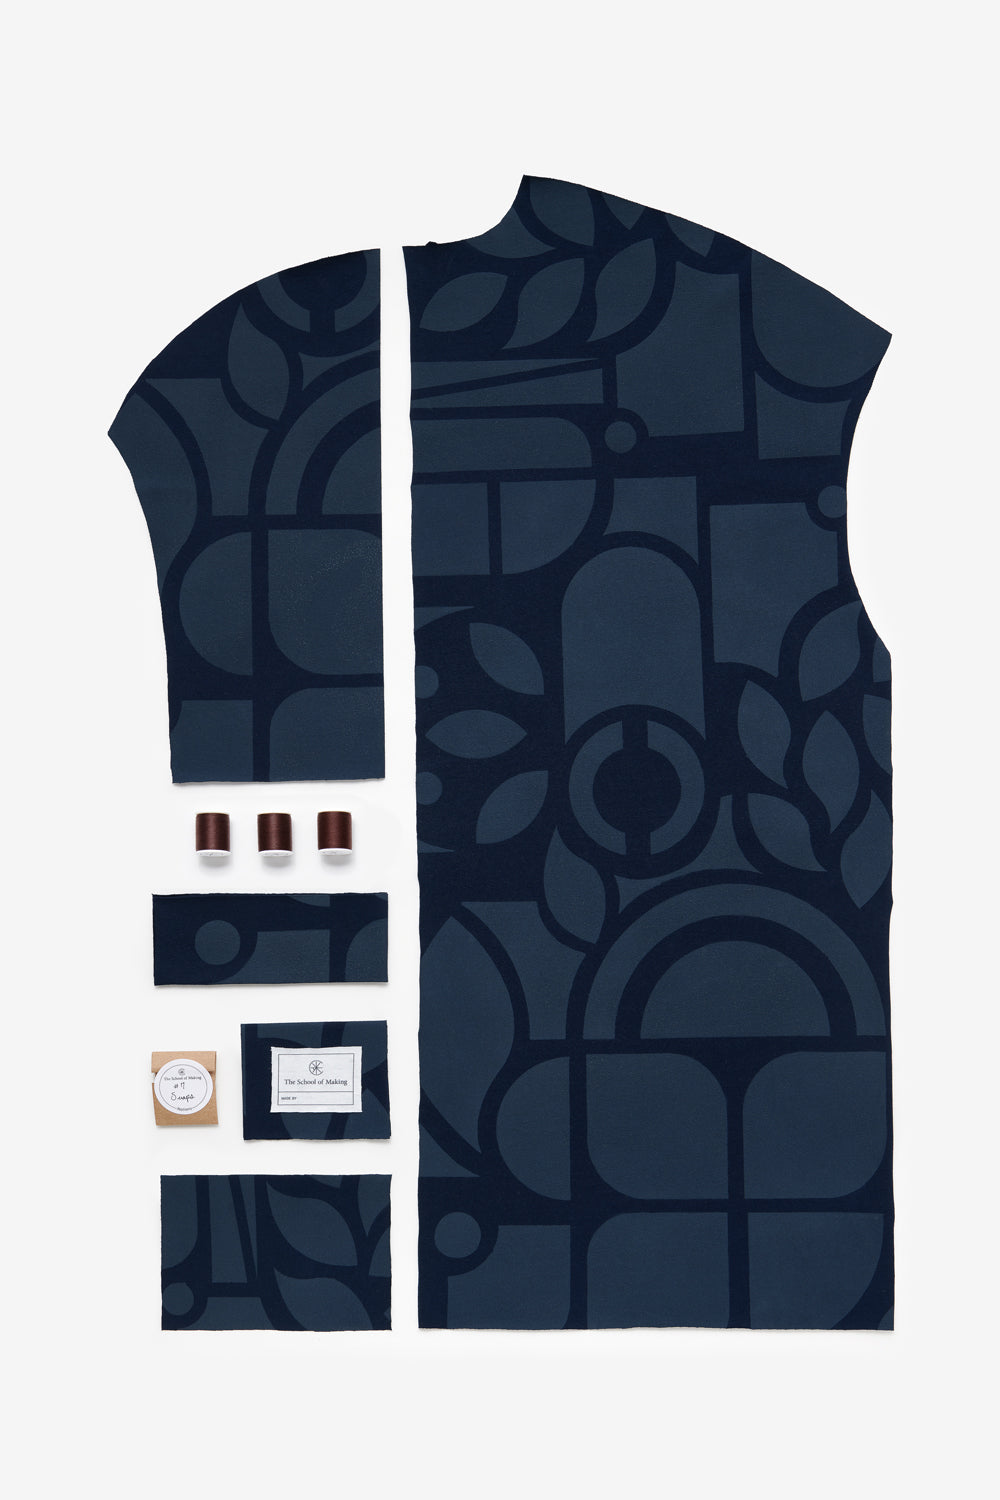 The School of Making DIY kit contents of the Car Coat in navy with Abstract design. Features pre-cut fabric and notions.